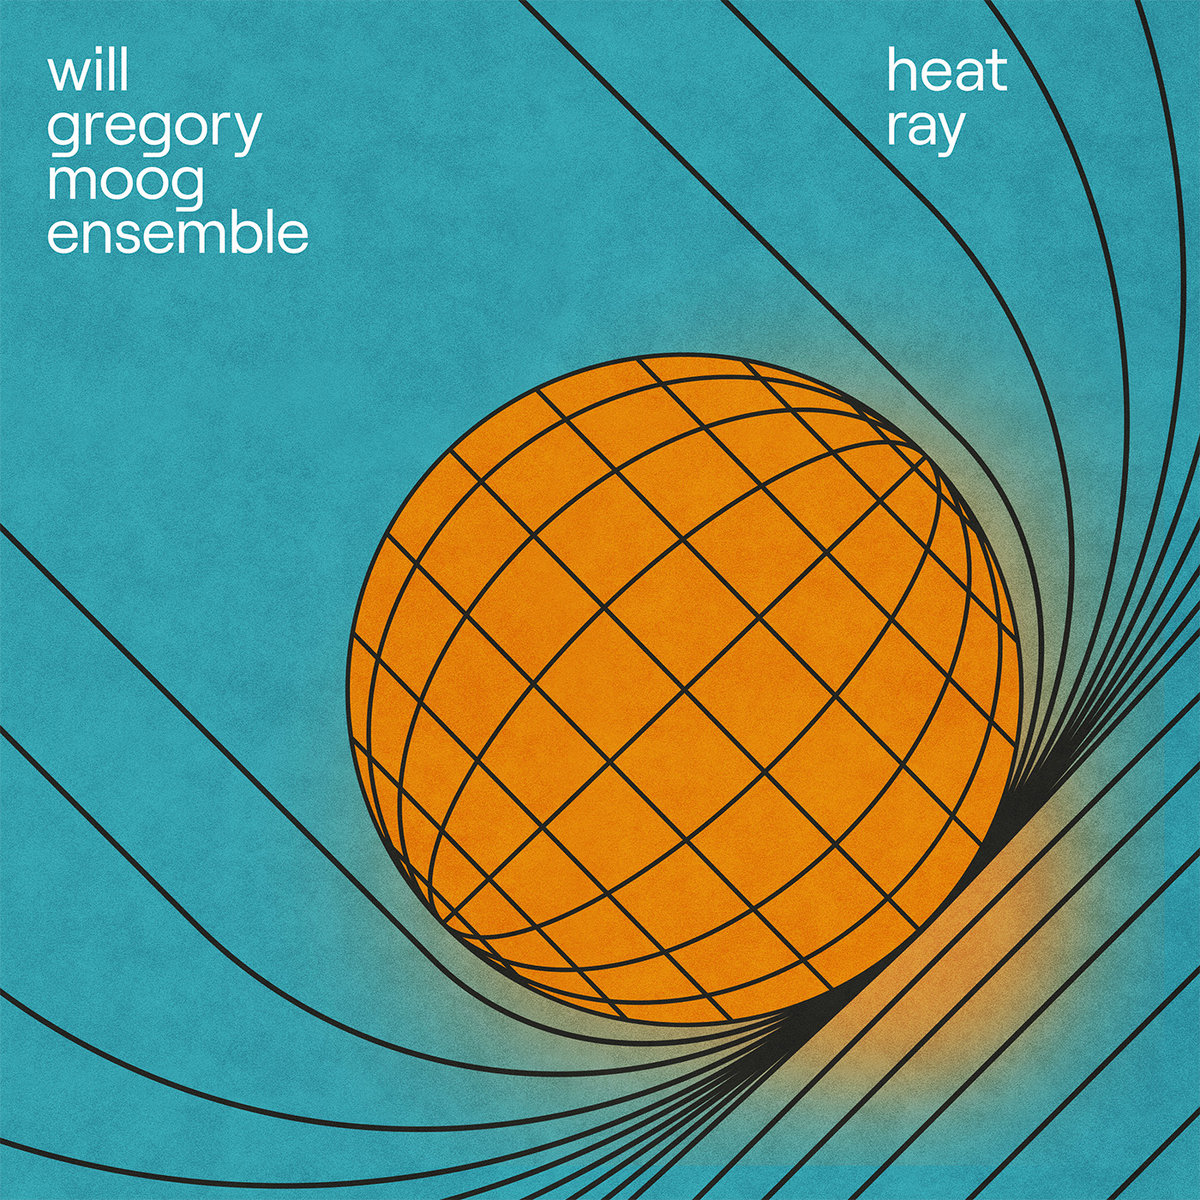 WILL GREGORY MOOG ENSEMBLE – HEAT RAY: THE ARCHIMEDES PROJECT